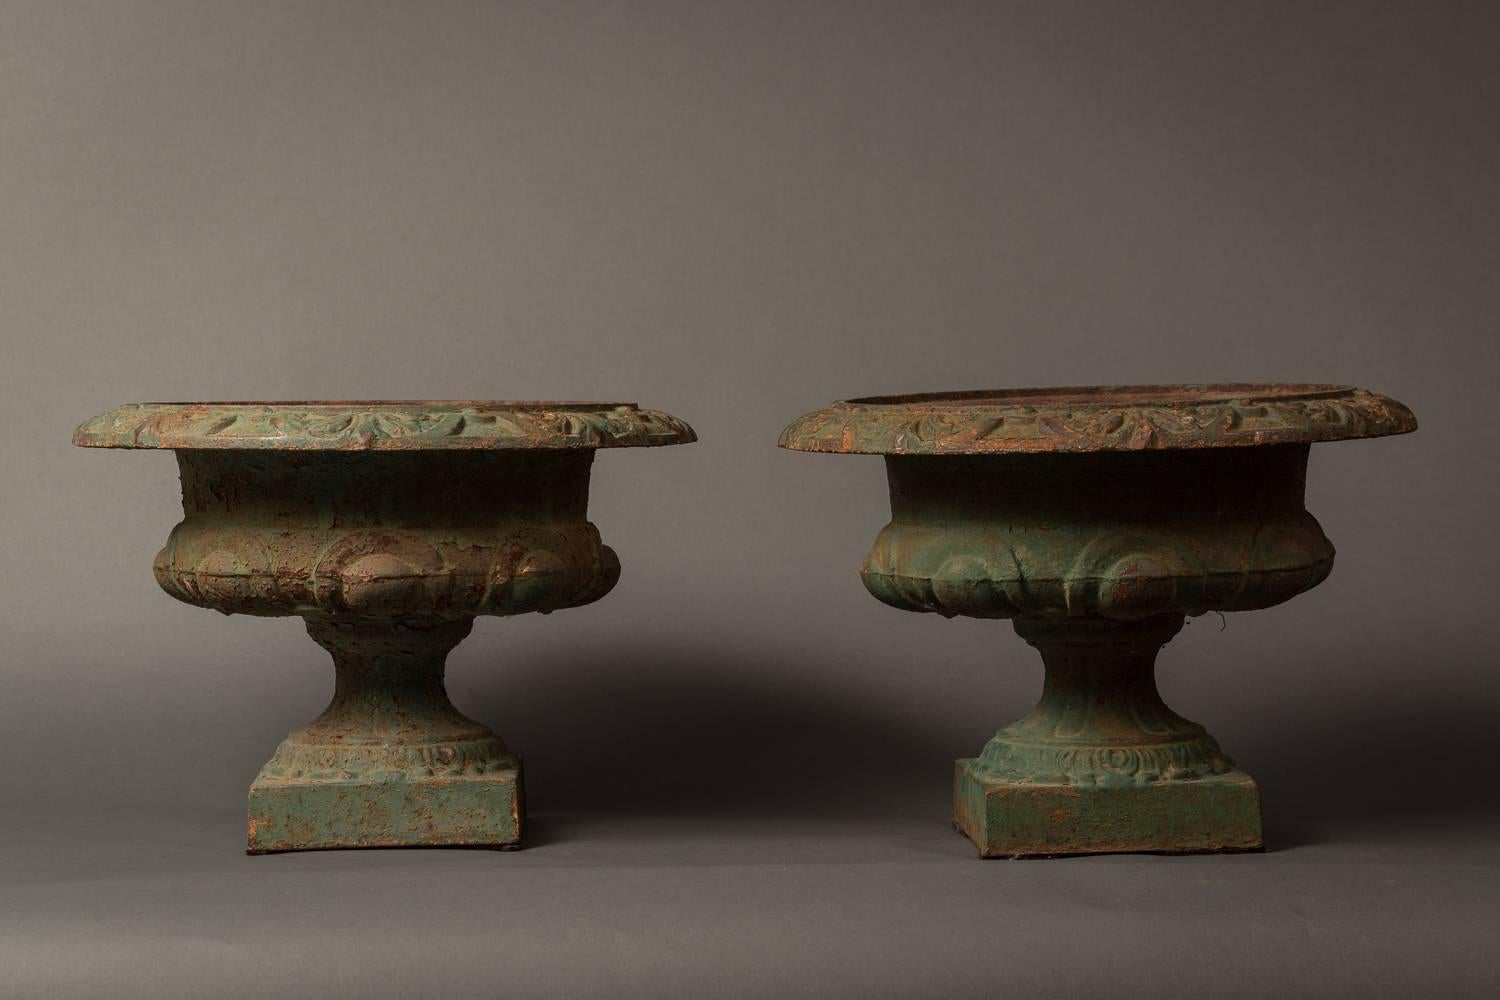 Pair of French iron urns with nice age and patina.